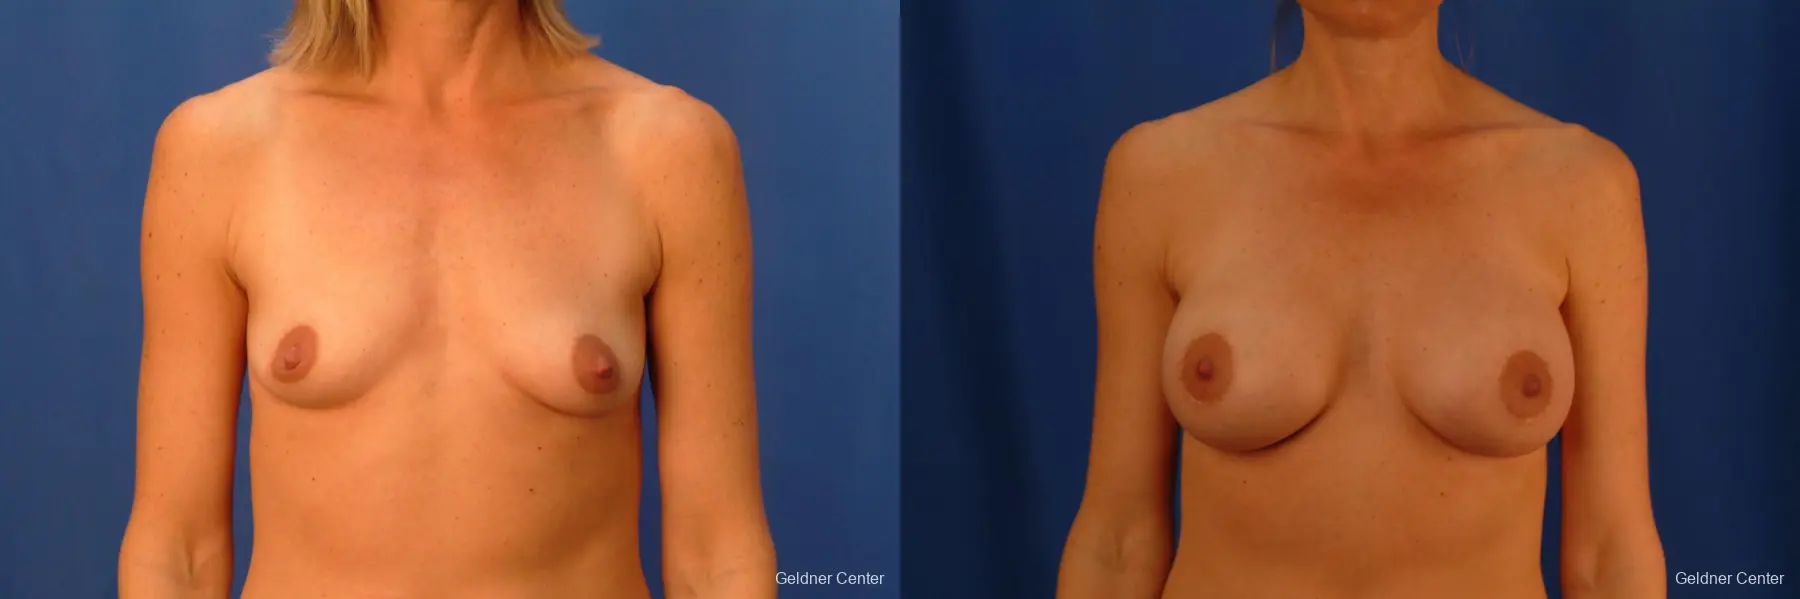 Breast Augmentation Lake Shore Dr, Chicago 2446 - Before and After 1